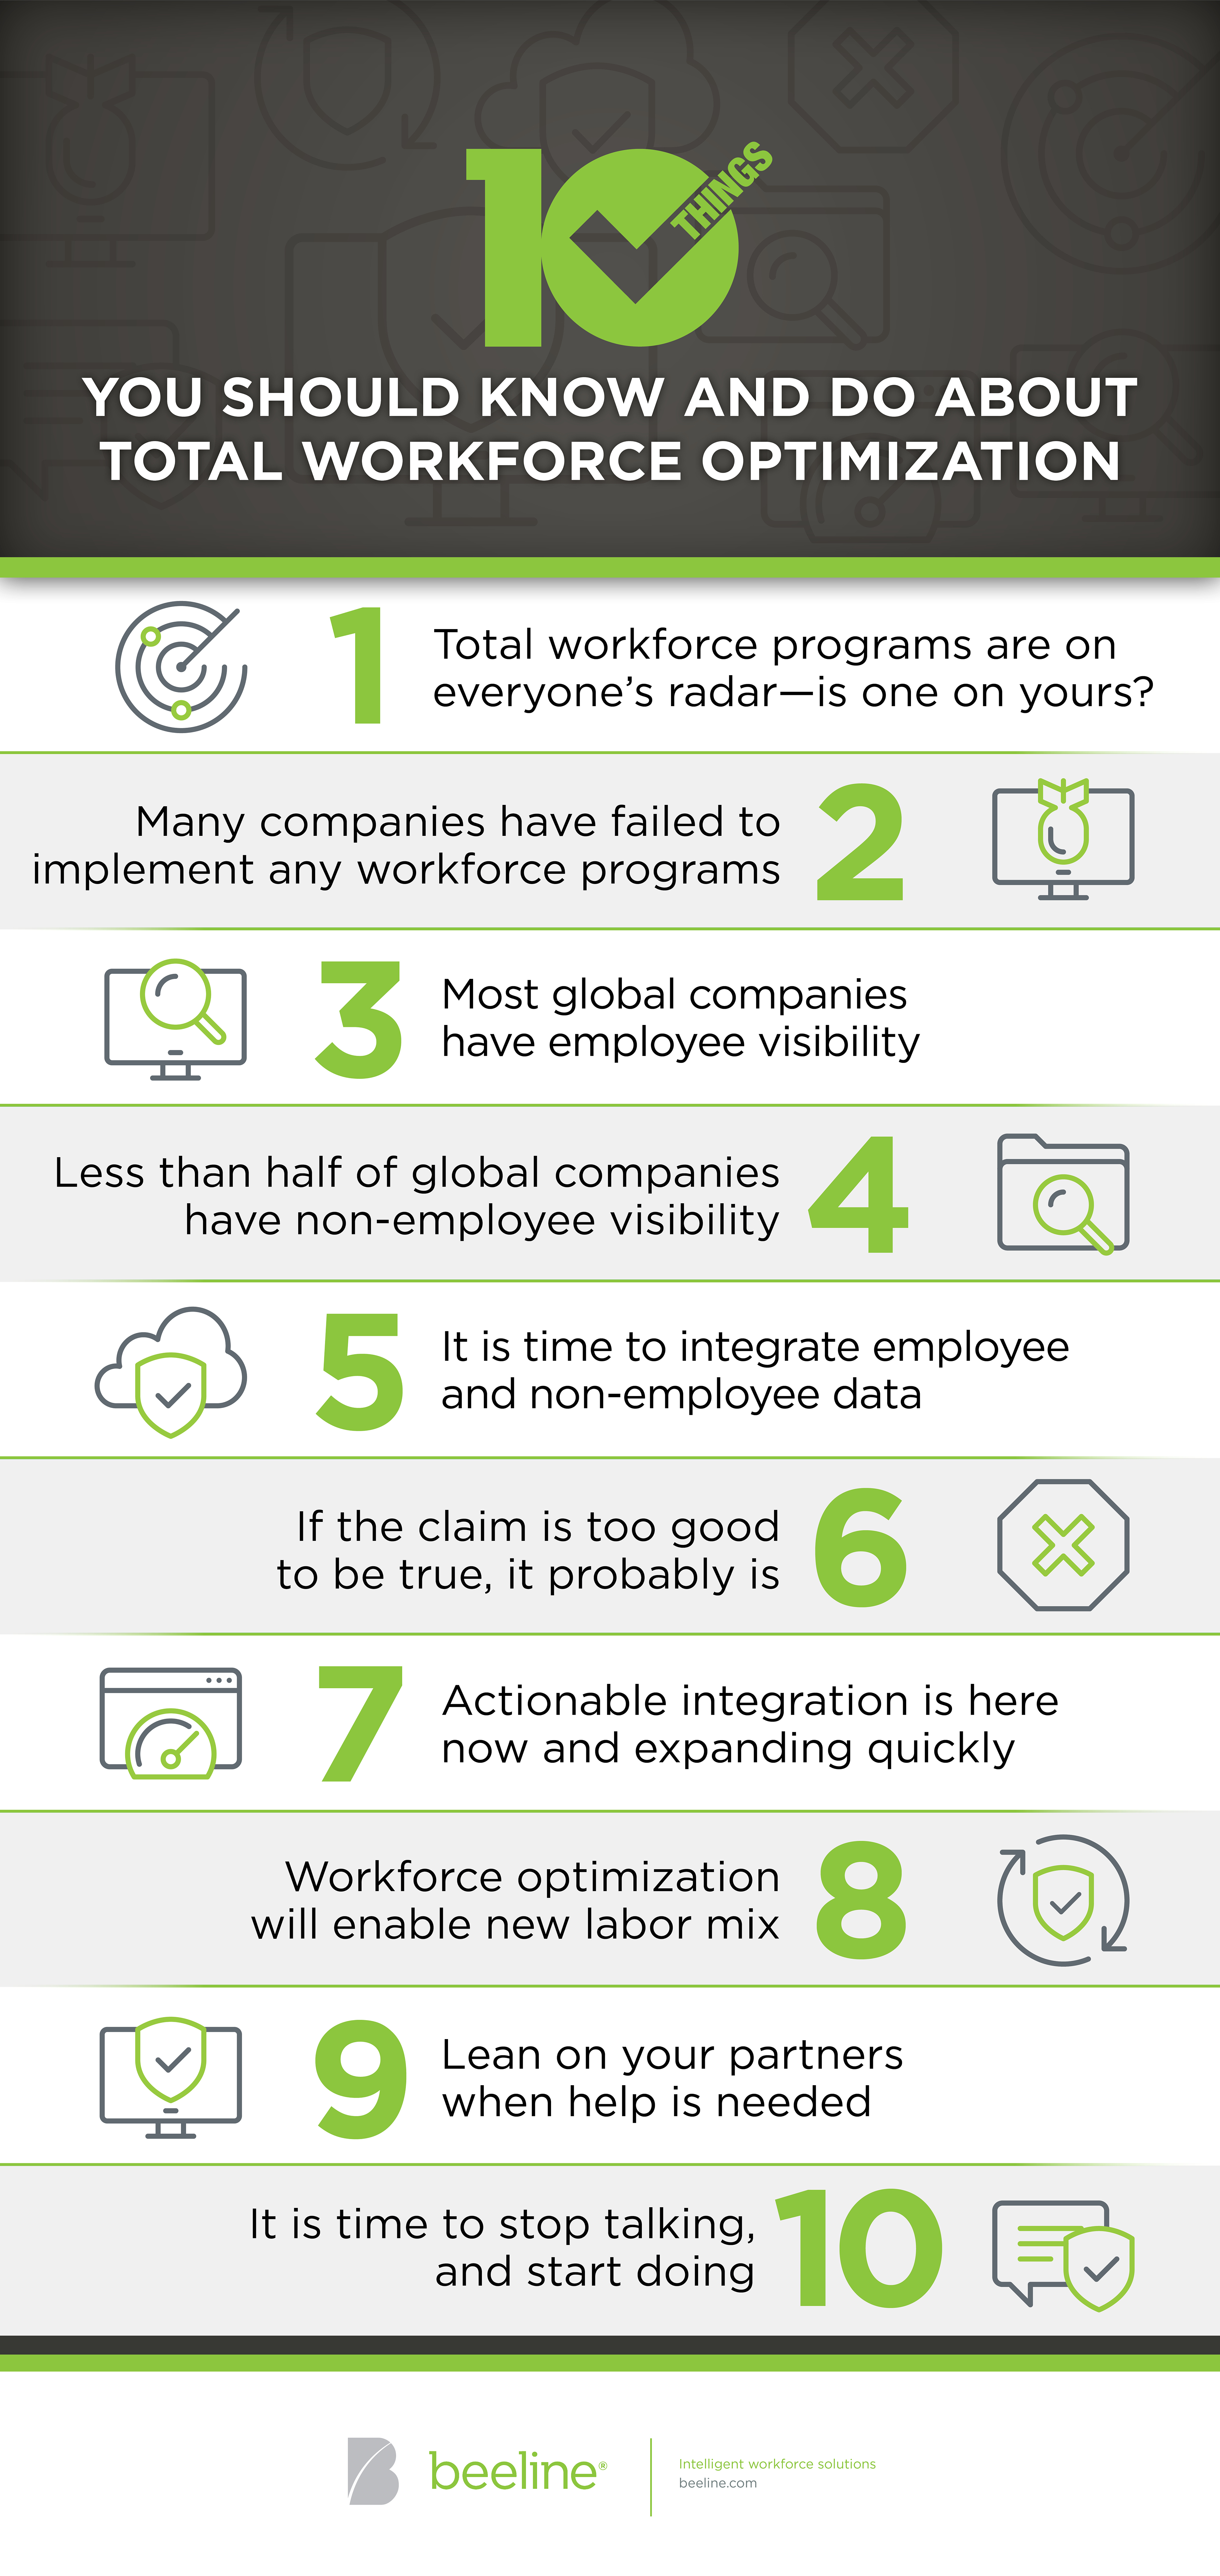 2018-Beeline_10-Things-You-Should-Know-and-Do-About-Total-Workforce-Optimization-_Infographic